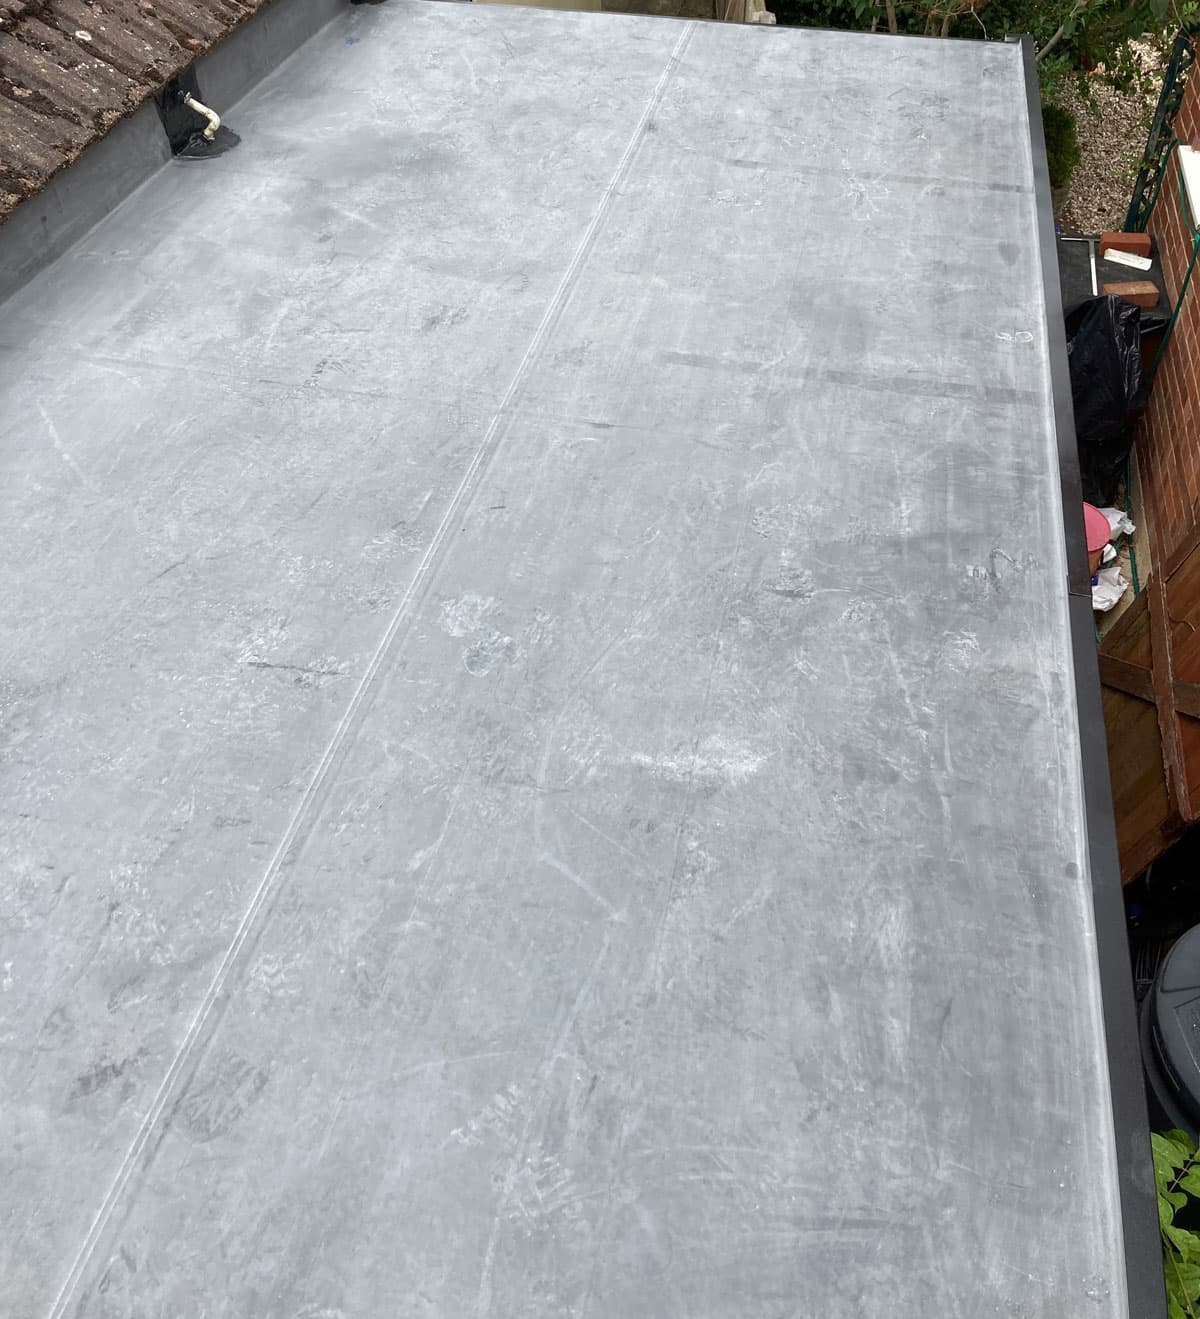 EPDM roofing installed in Gloucester by Rex Bishop and Son